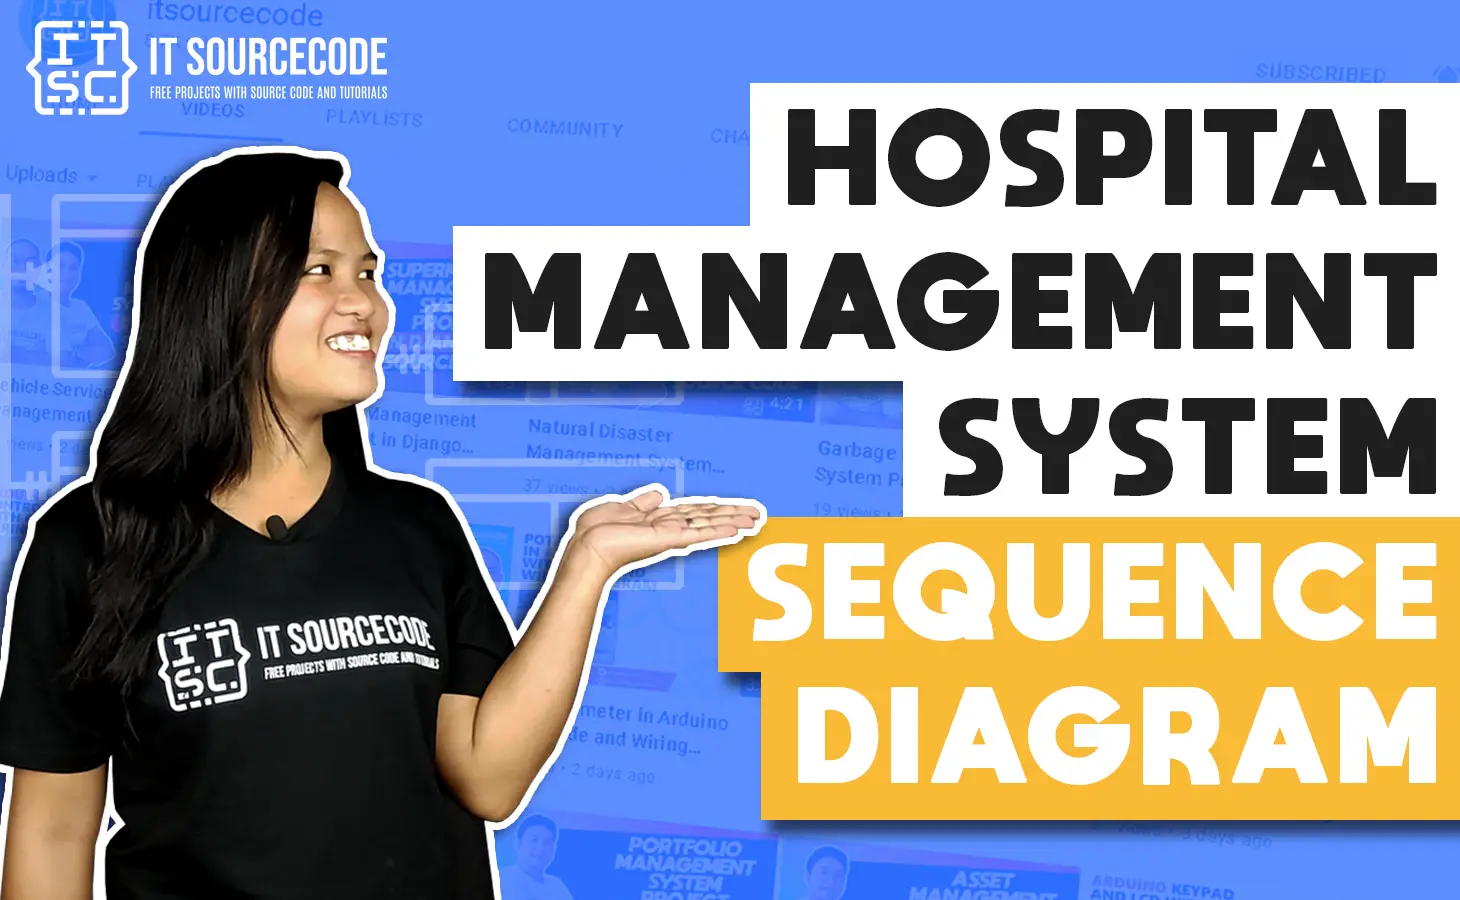 Sequence Diagram for Hospital Management System